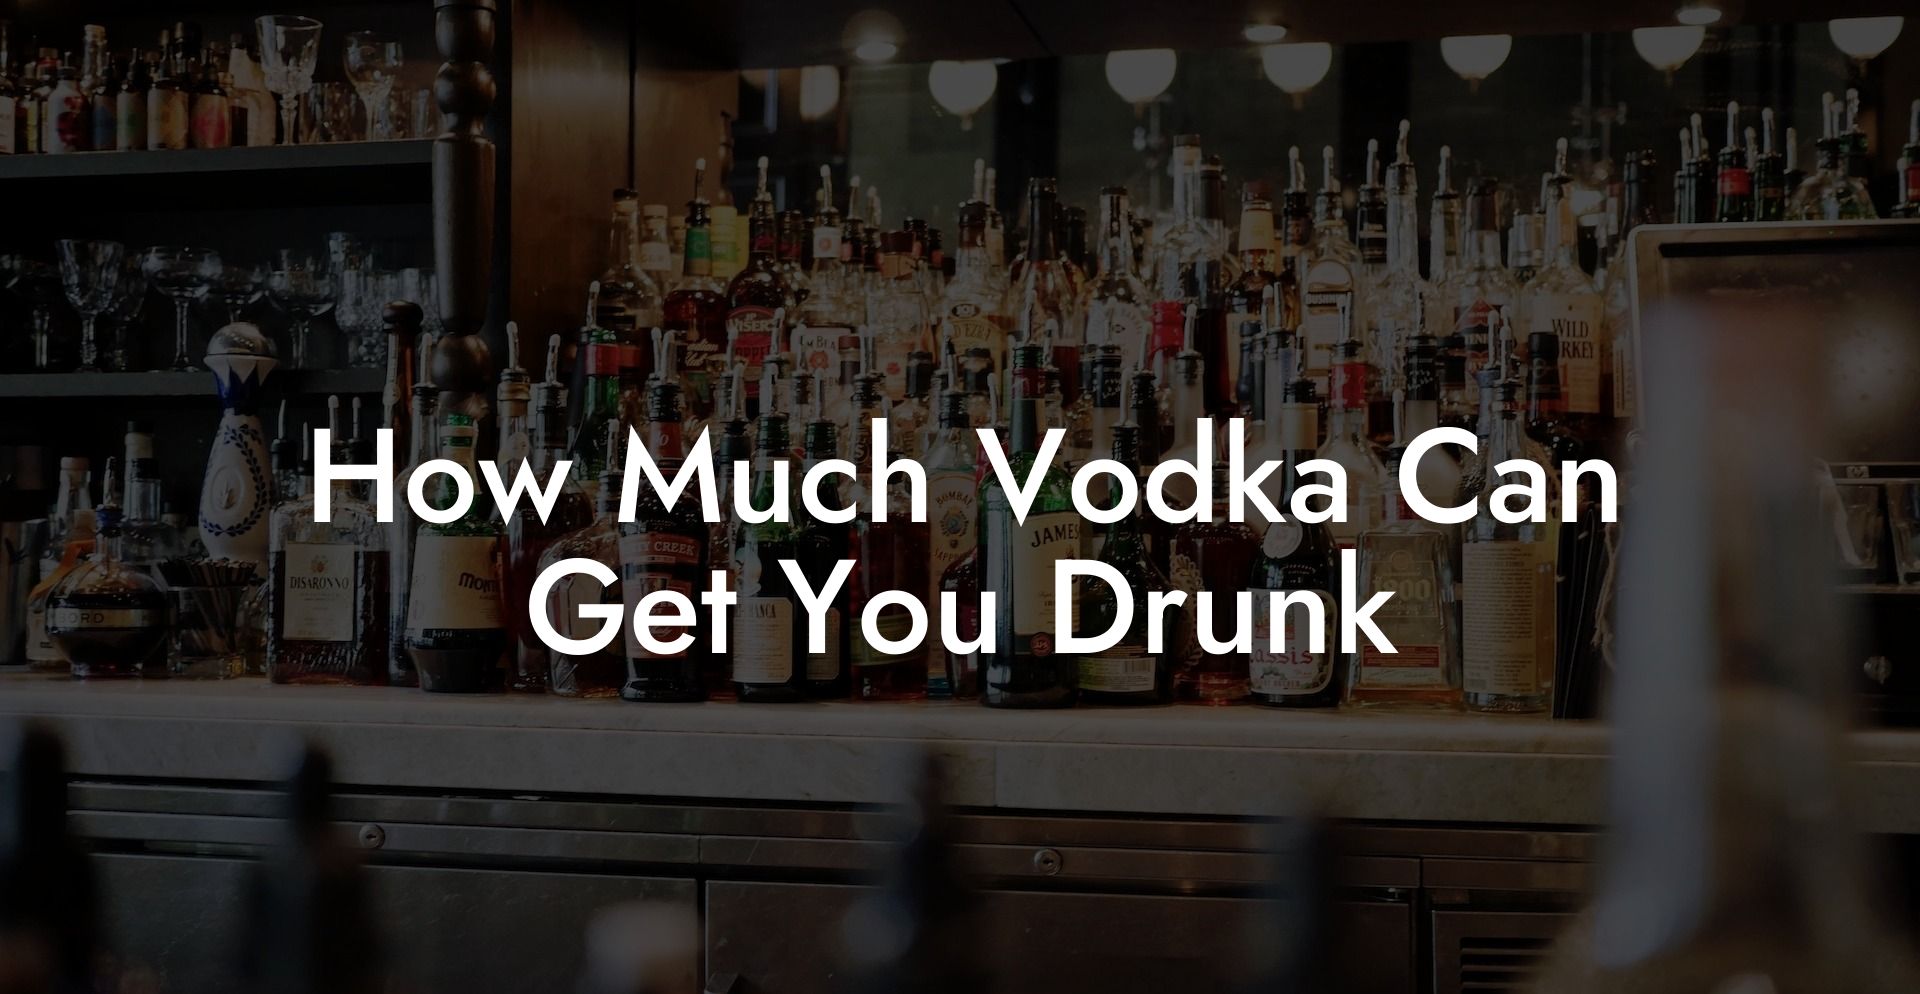 How Much Vodka Can Get You Drunk